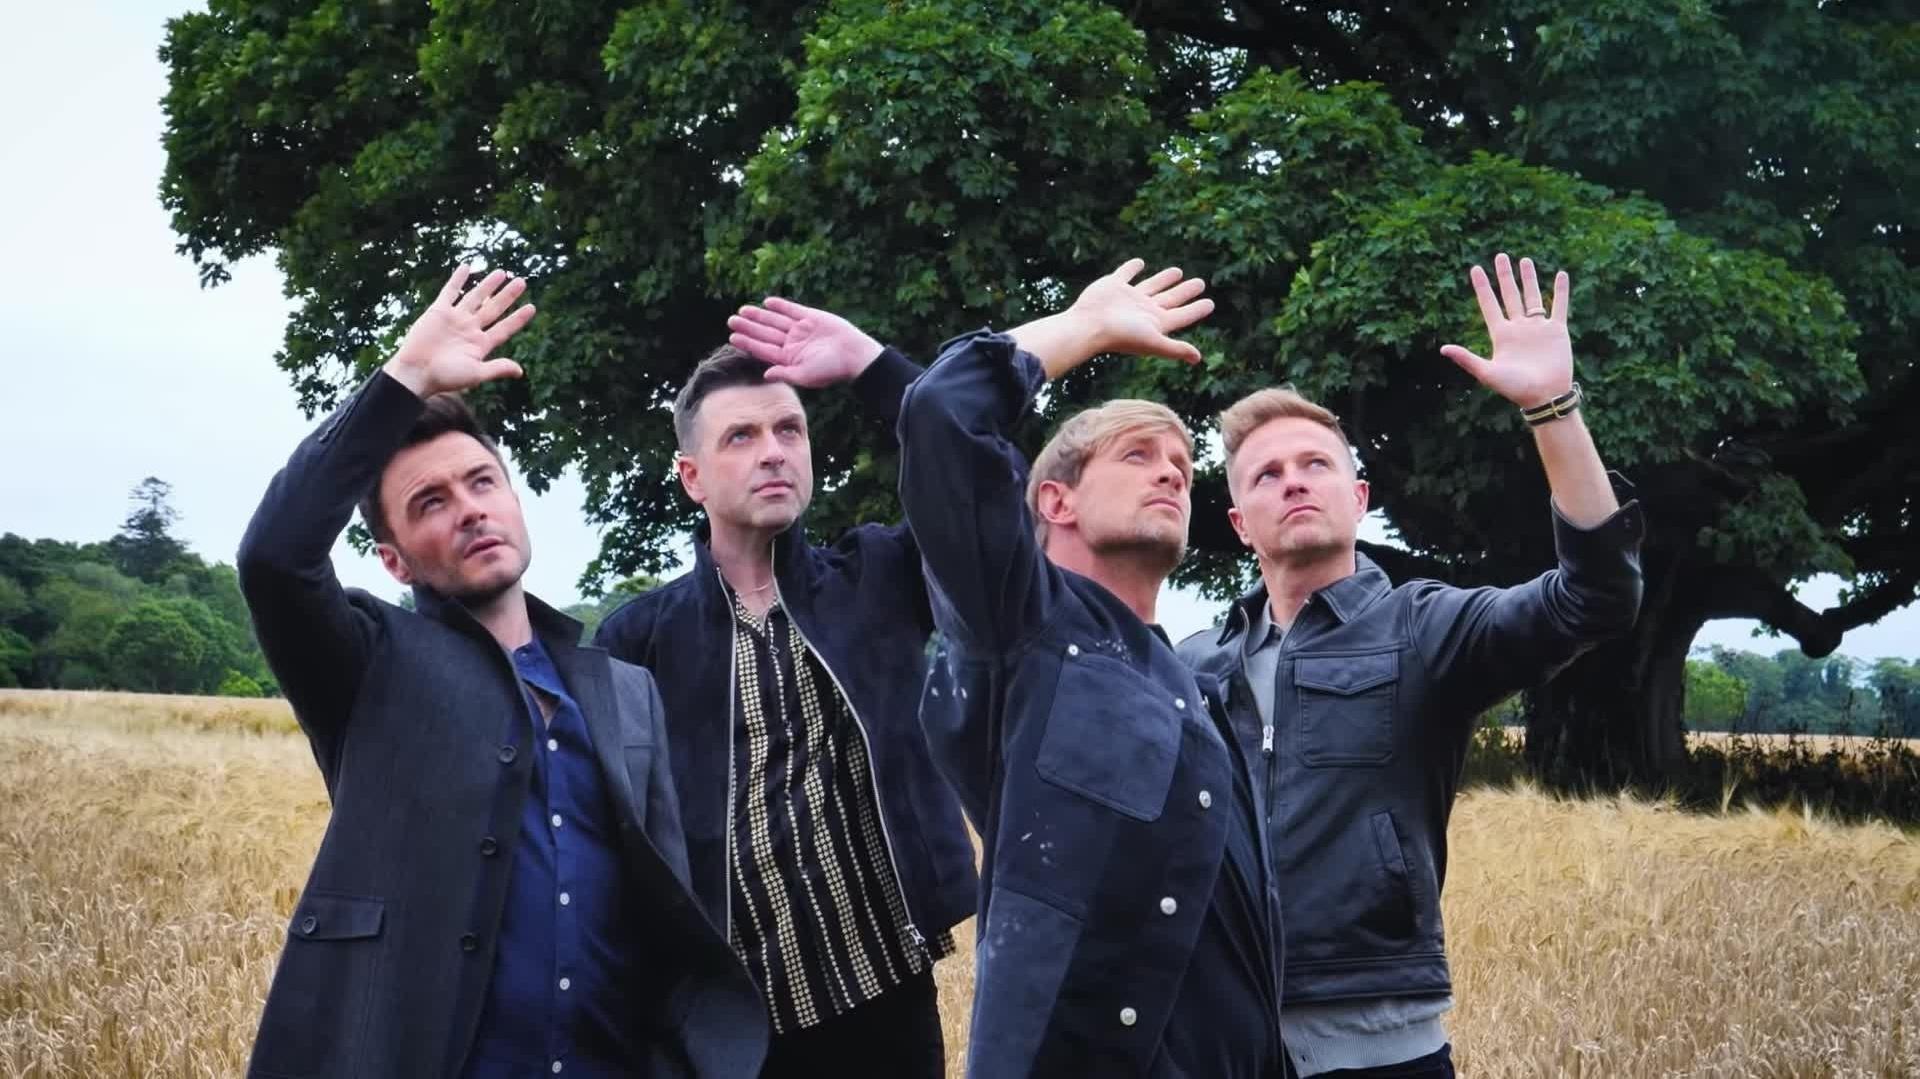 Westlife - Alone Together (behind the scenes at the photoshoot)